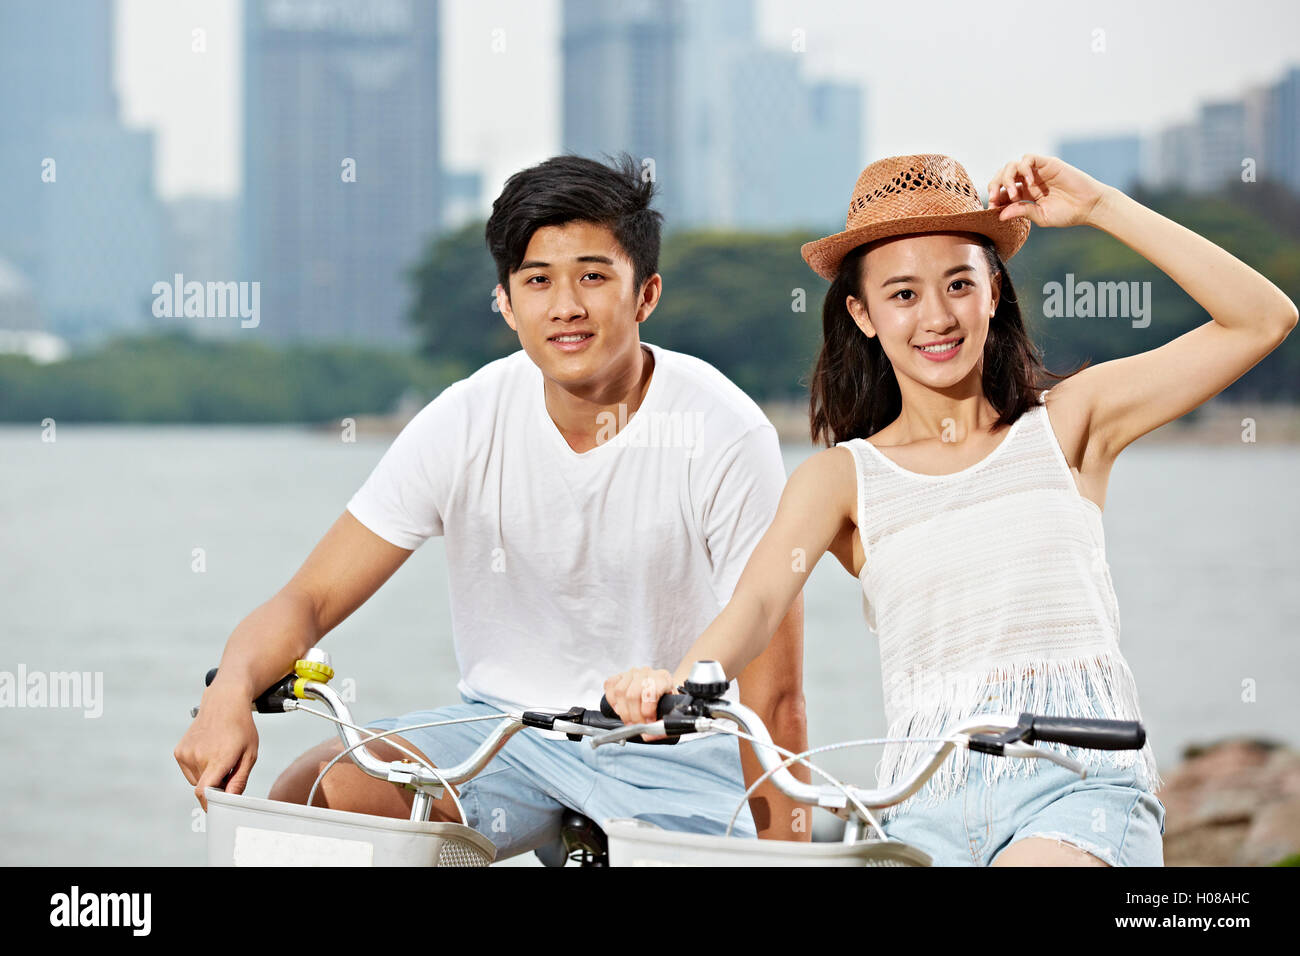 young asian couple riding bike in urban park, looking at camera smiling Stock Photo